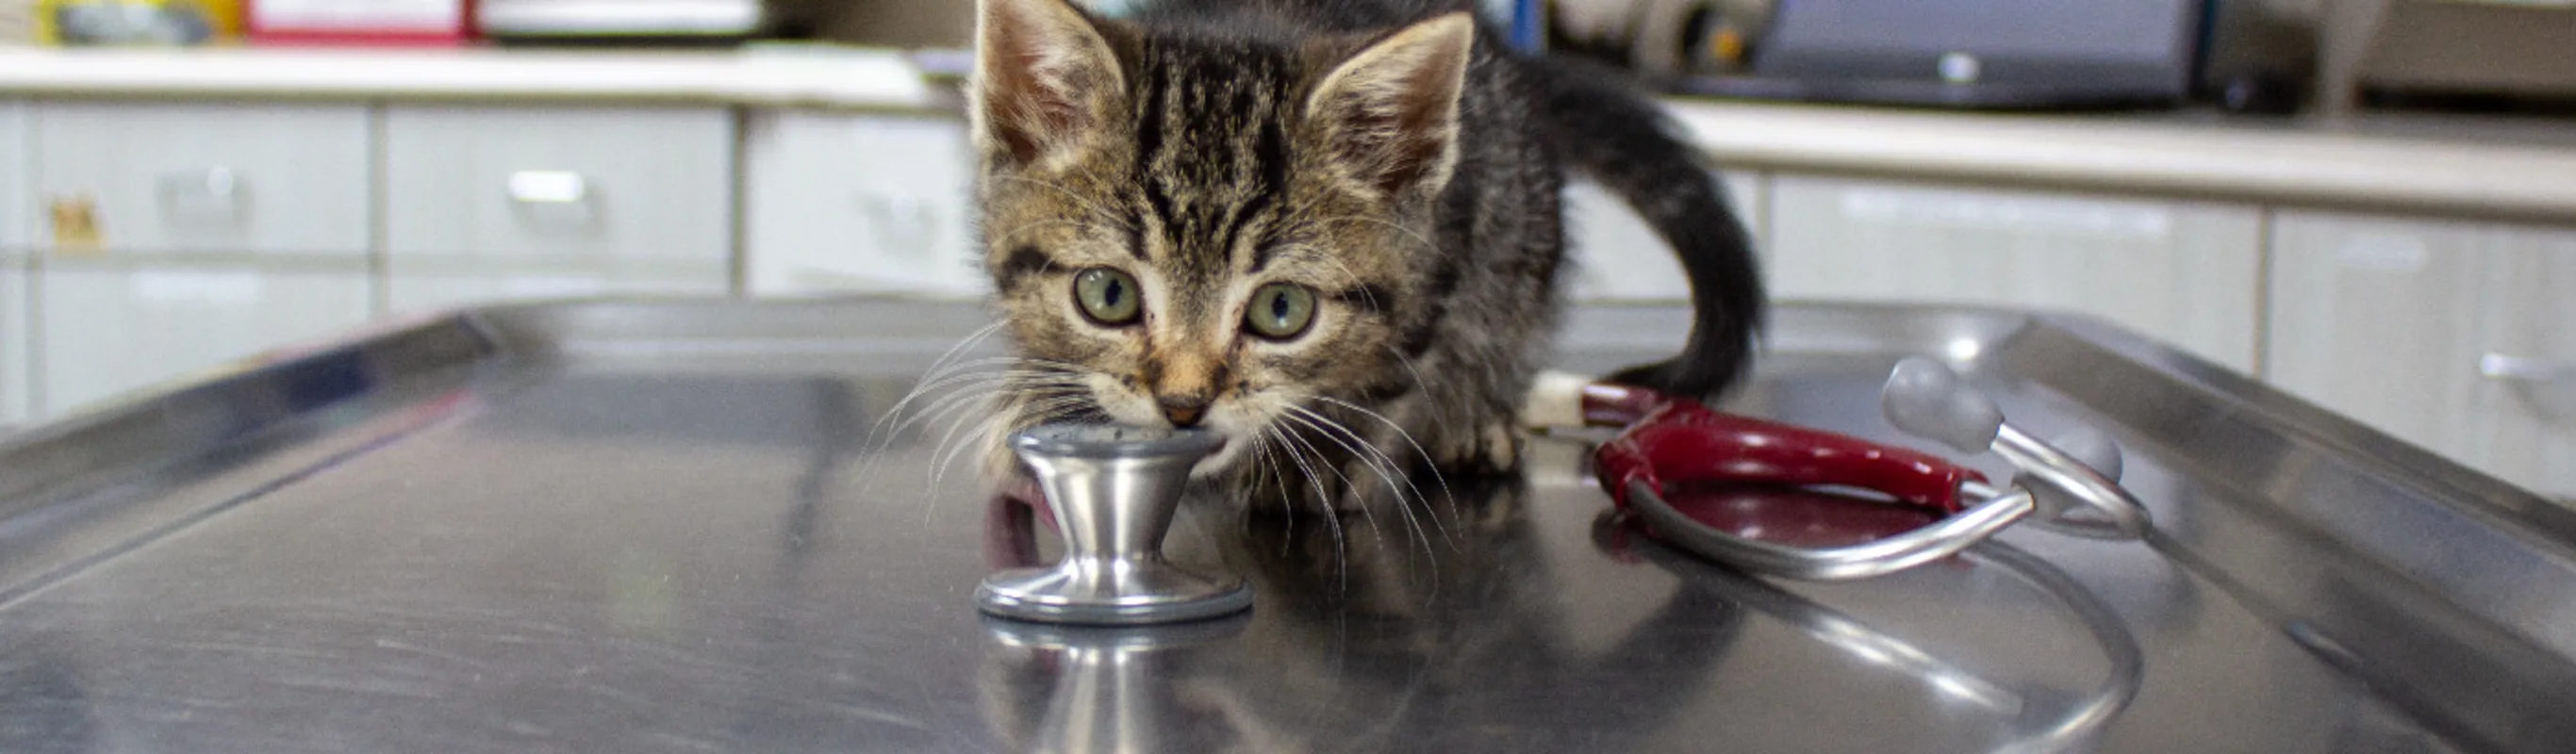 Little kitten with a red stethoscope on a table